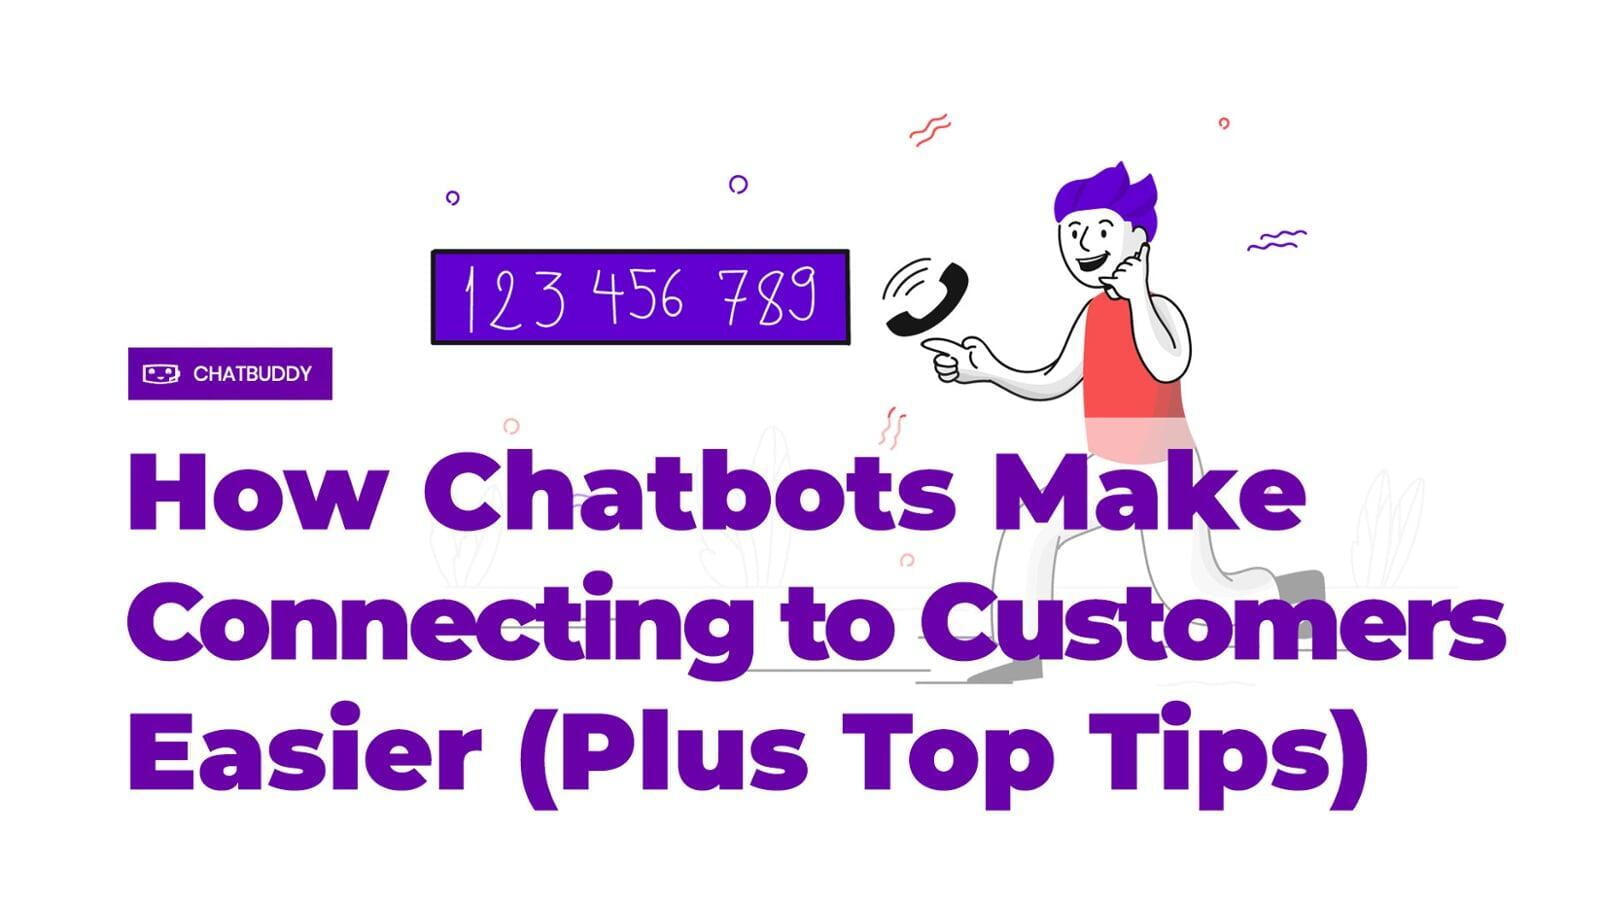 How Chatbots Make Connecting to Customers Easier (Plus Top Tips)